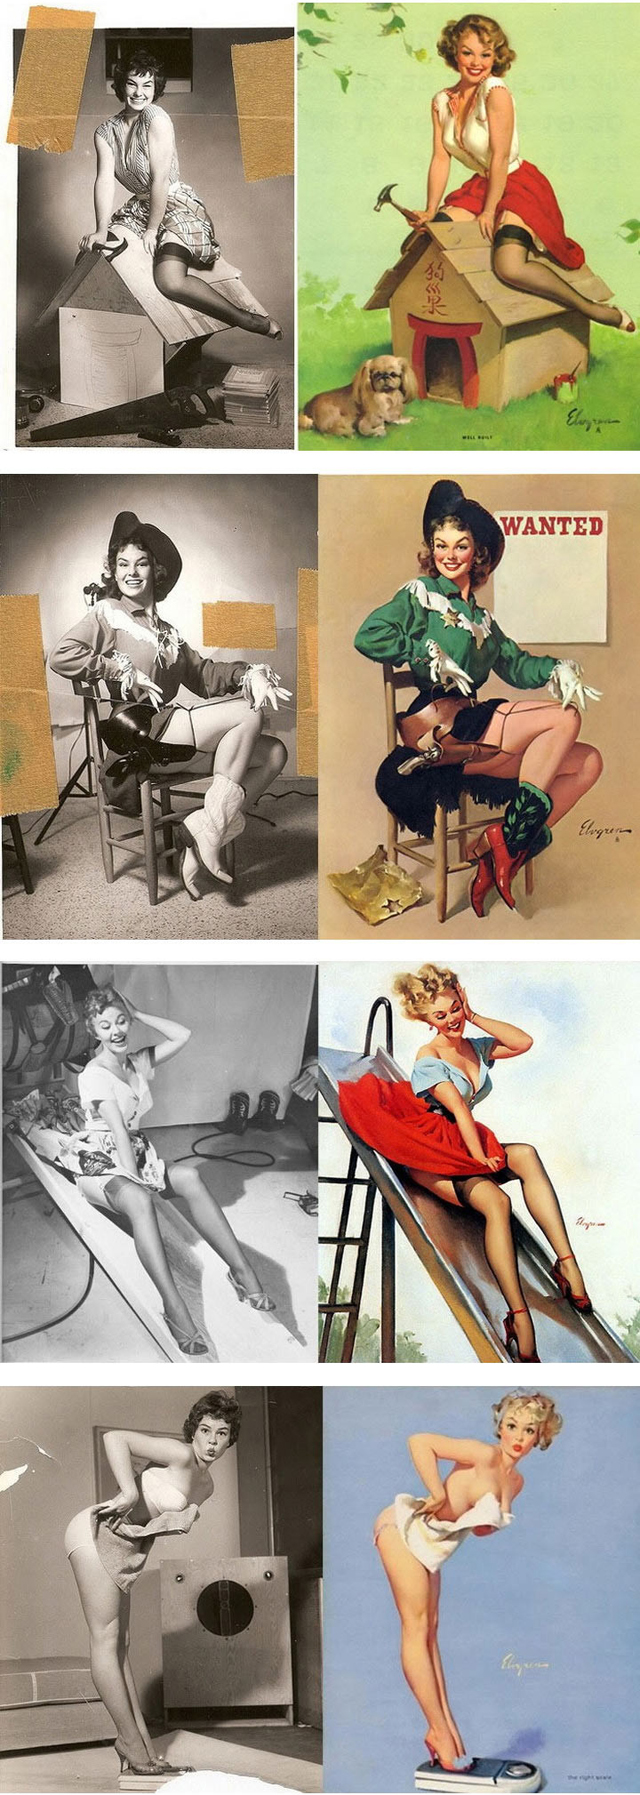 inspiration behind classic pin-up images